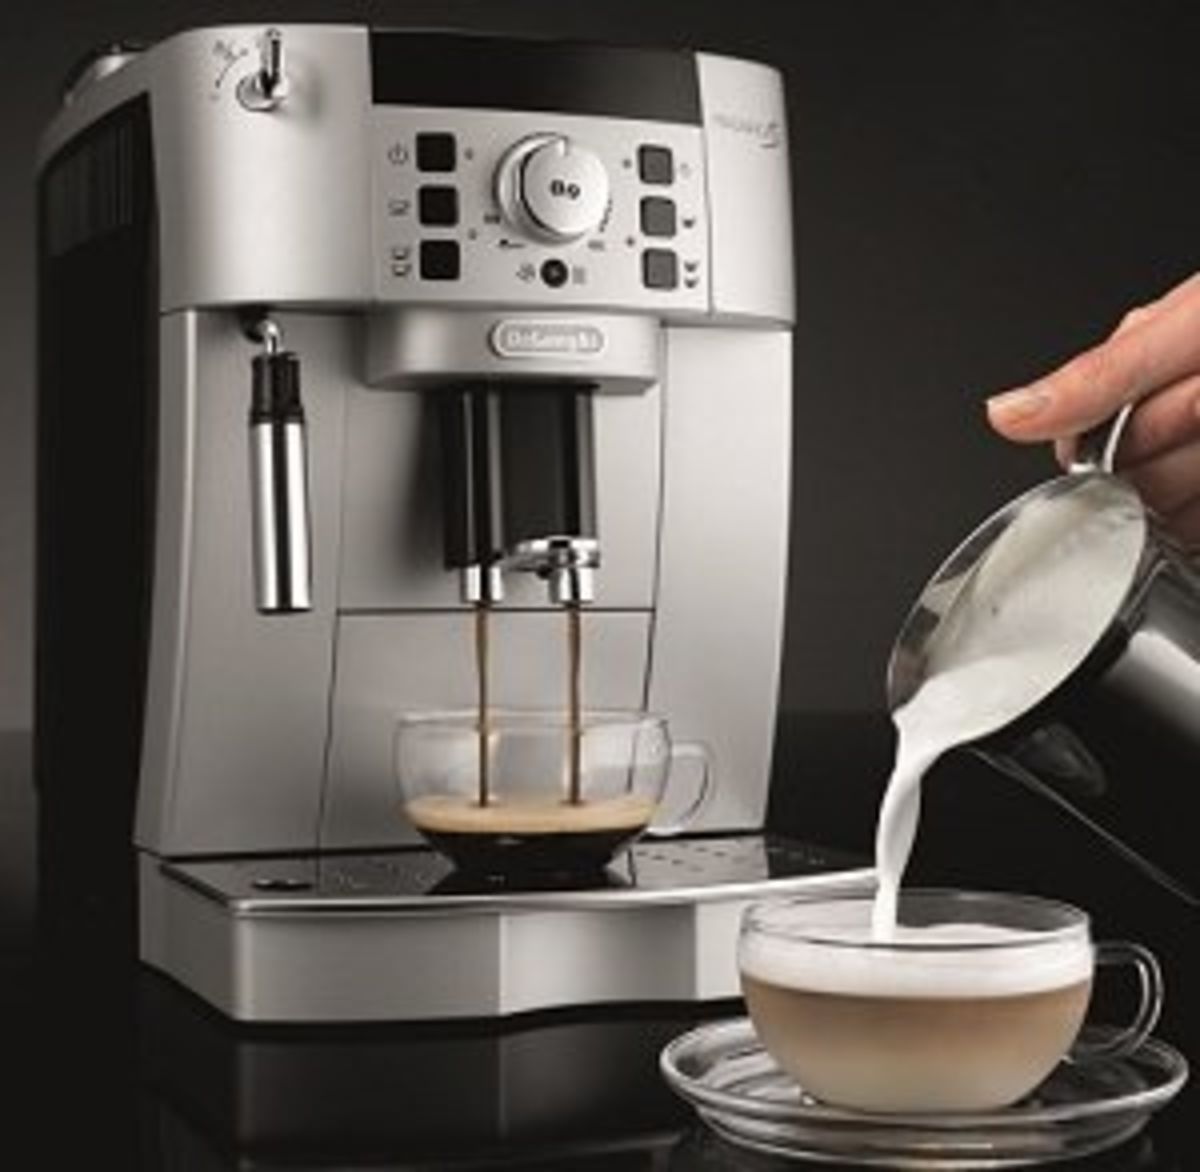 BestRated Super Automatic Espresso Coffee Machines For Home Use Reviews And Ratings For 2015